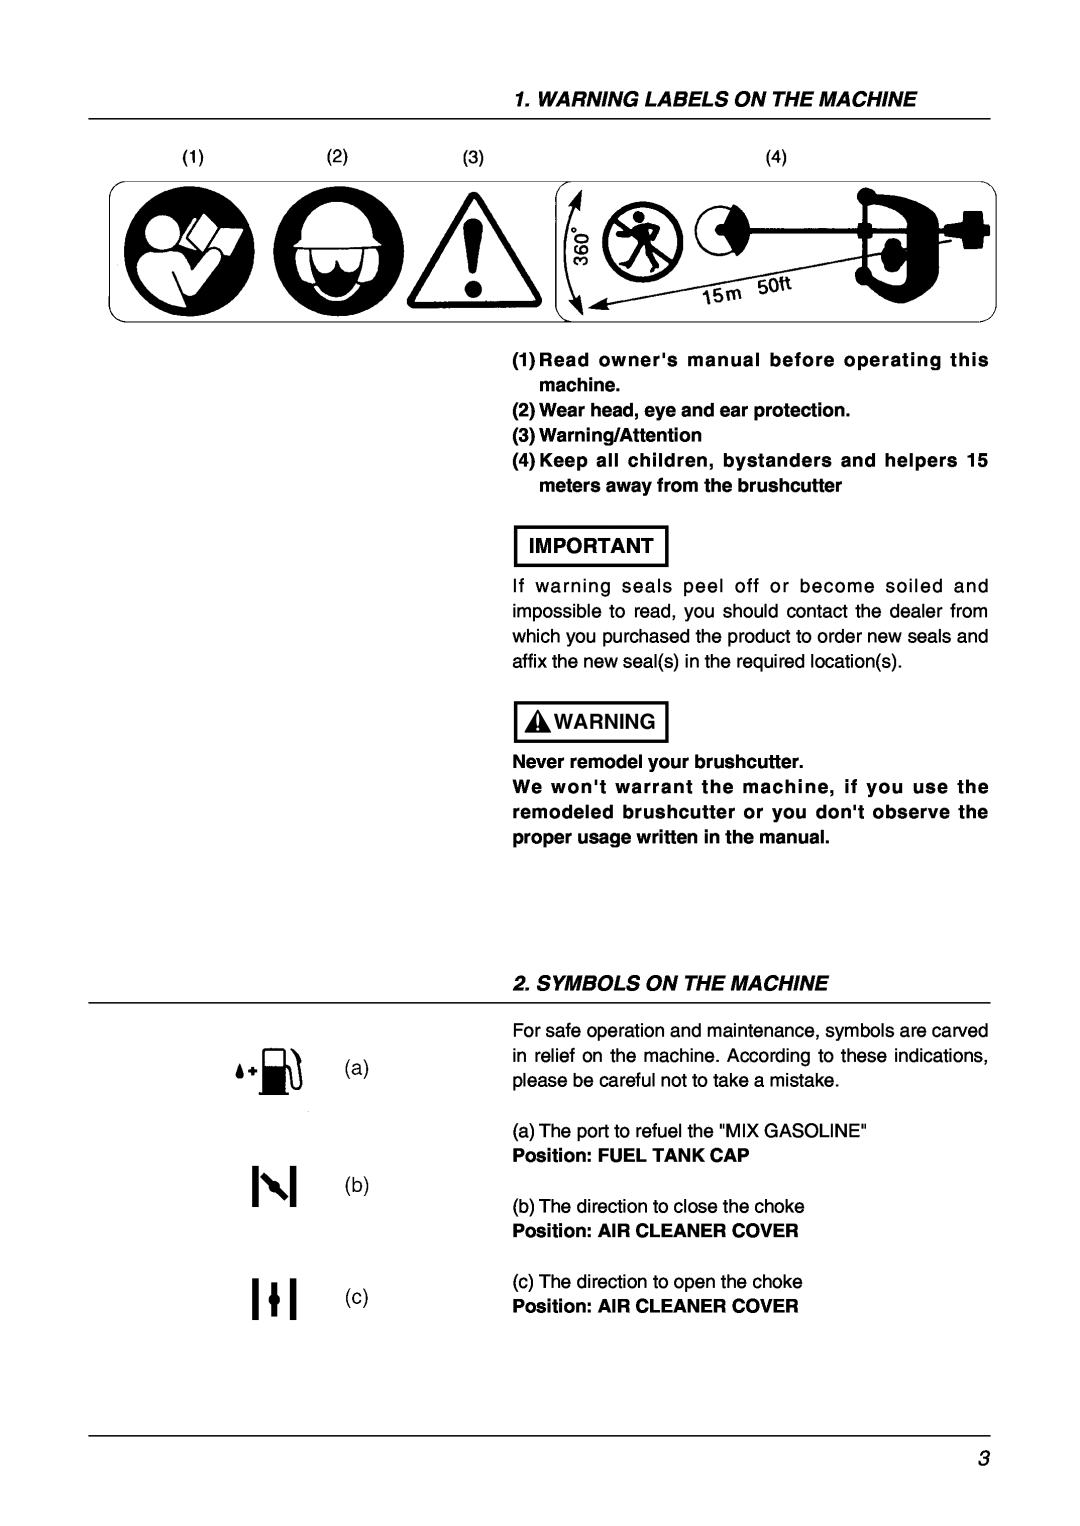 Zenoah BK4310FL Warning Labels On The Machine, Symbols On The Machine, Read owners manual before operating this machine 